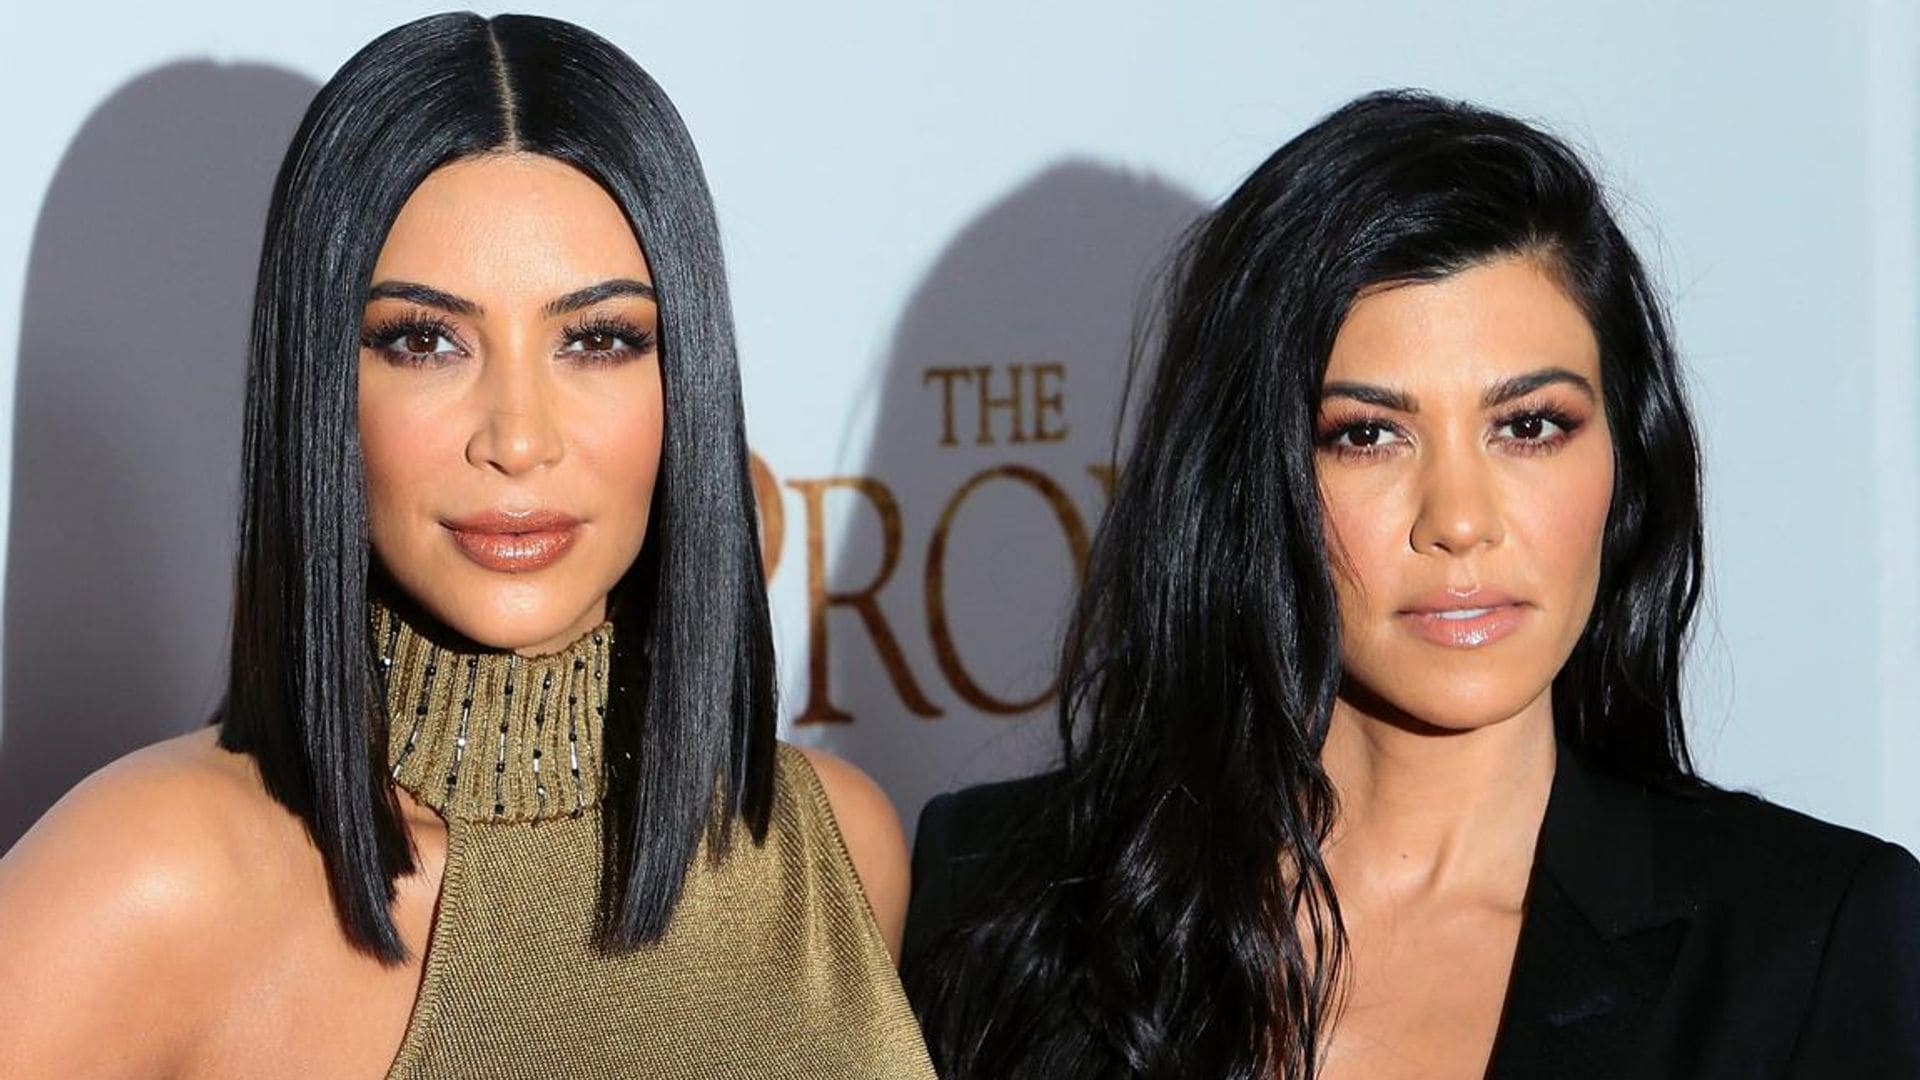 Kim Kardashian reveals more details about shocking physical fight with Kourtney